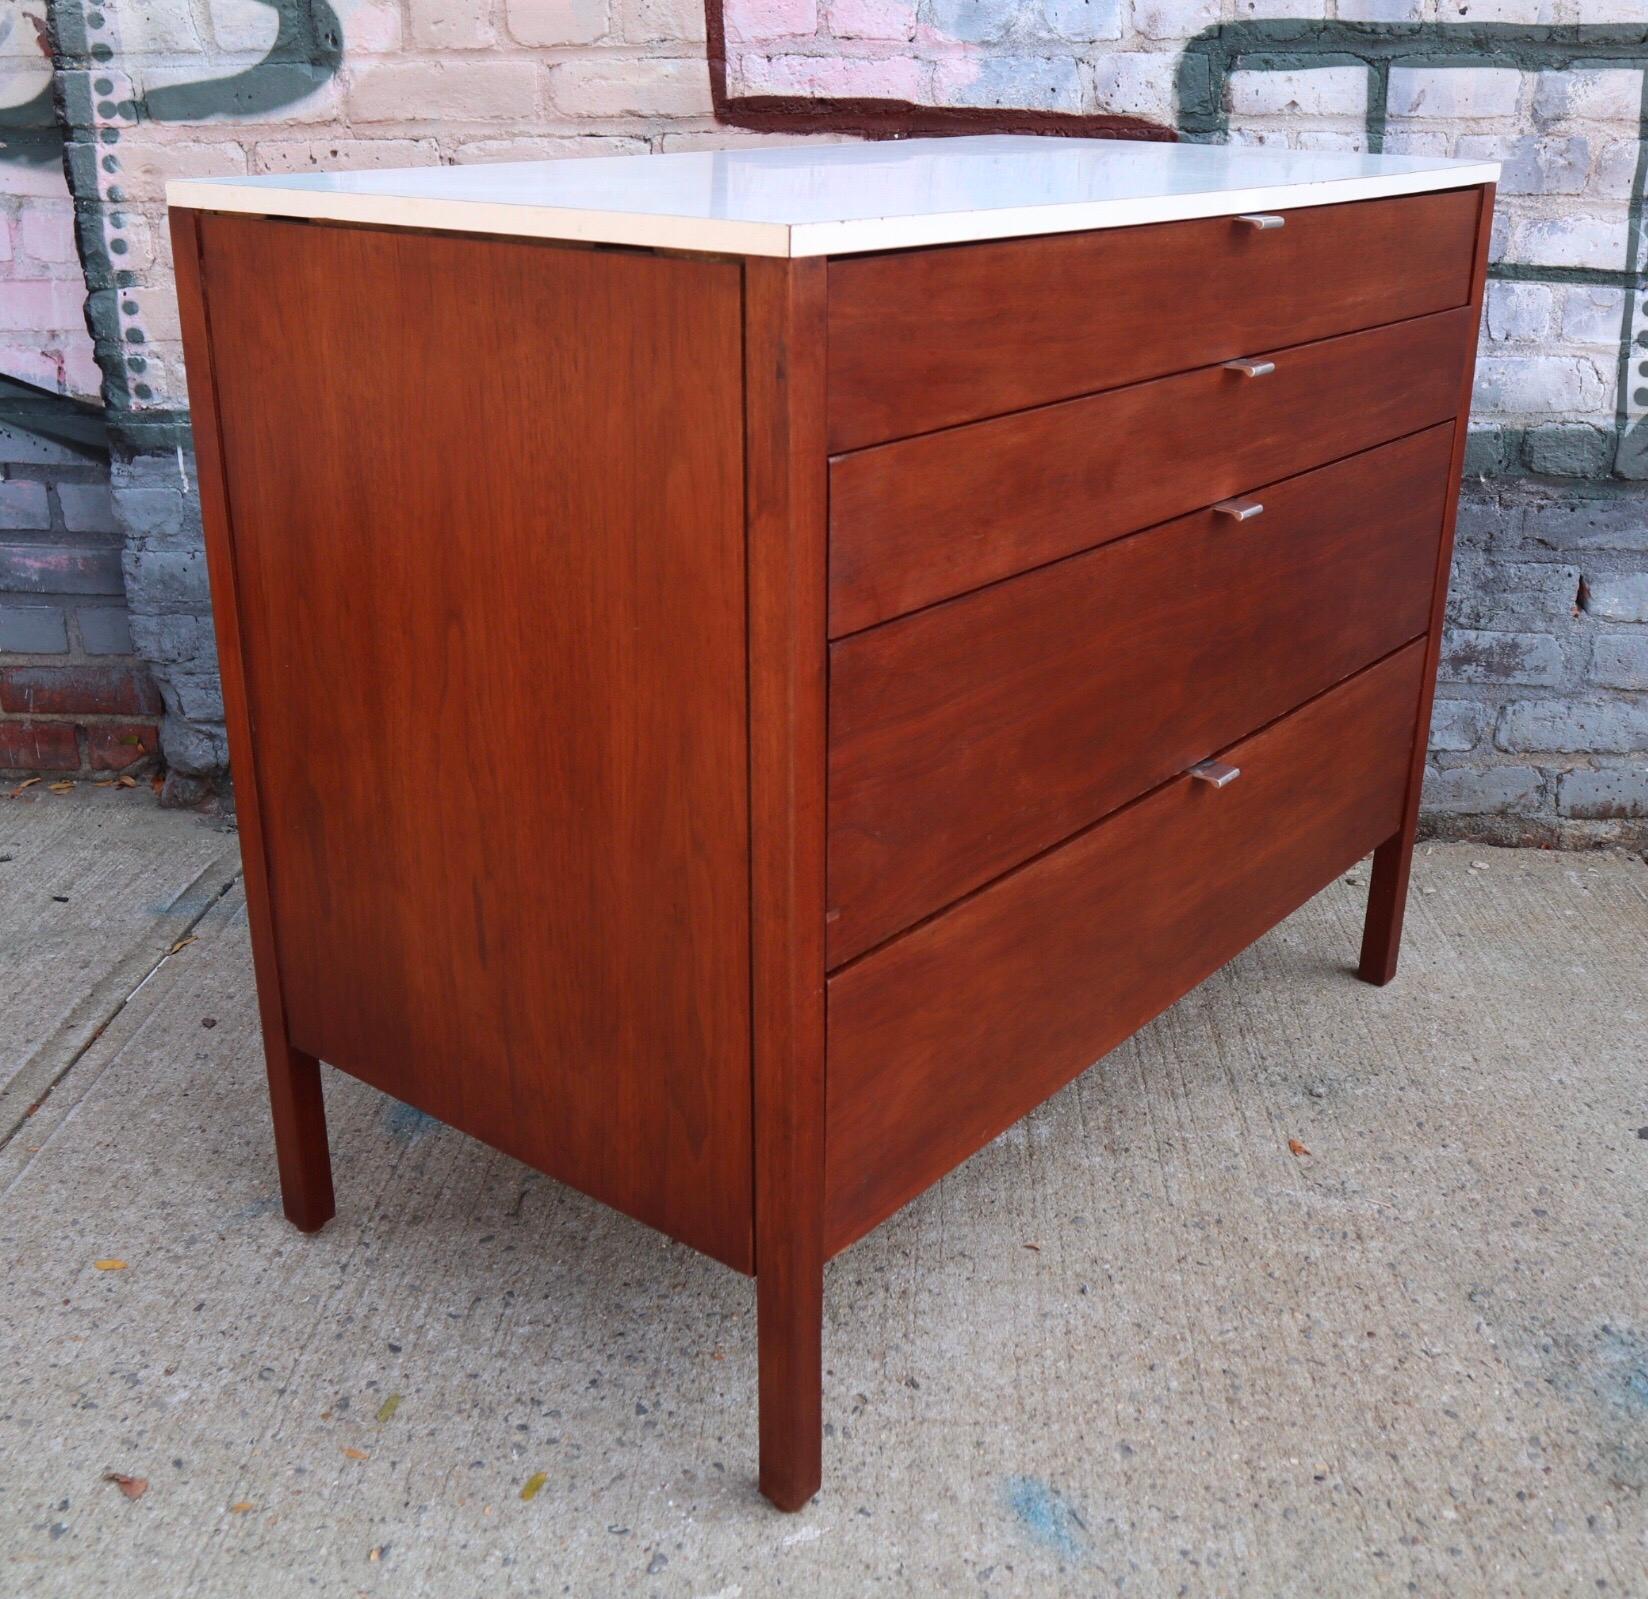 Gorgeous walnut Florence Knoll dresser. Signed with Early bowtie label in top drawer. All drawers function smoothly. Wood exterior has been refinished. White laminate top in good condition.